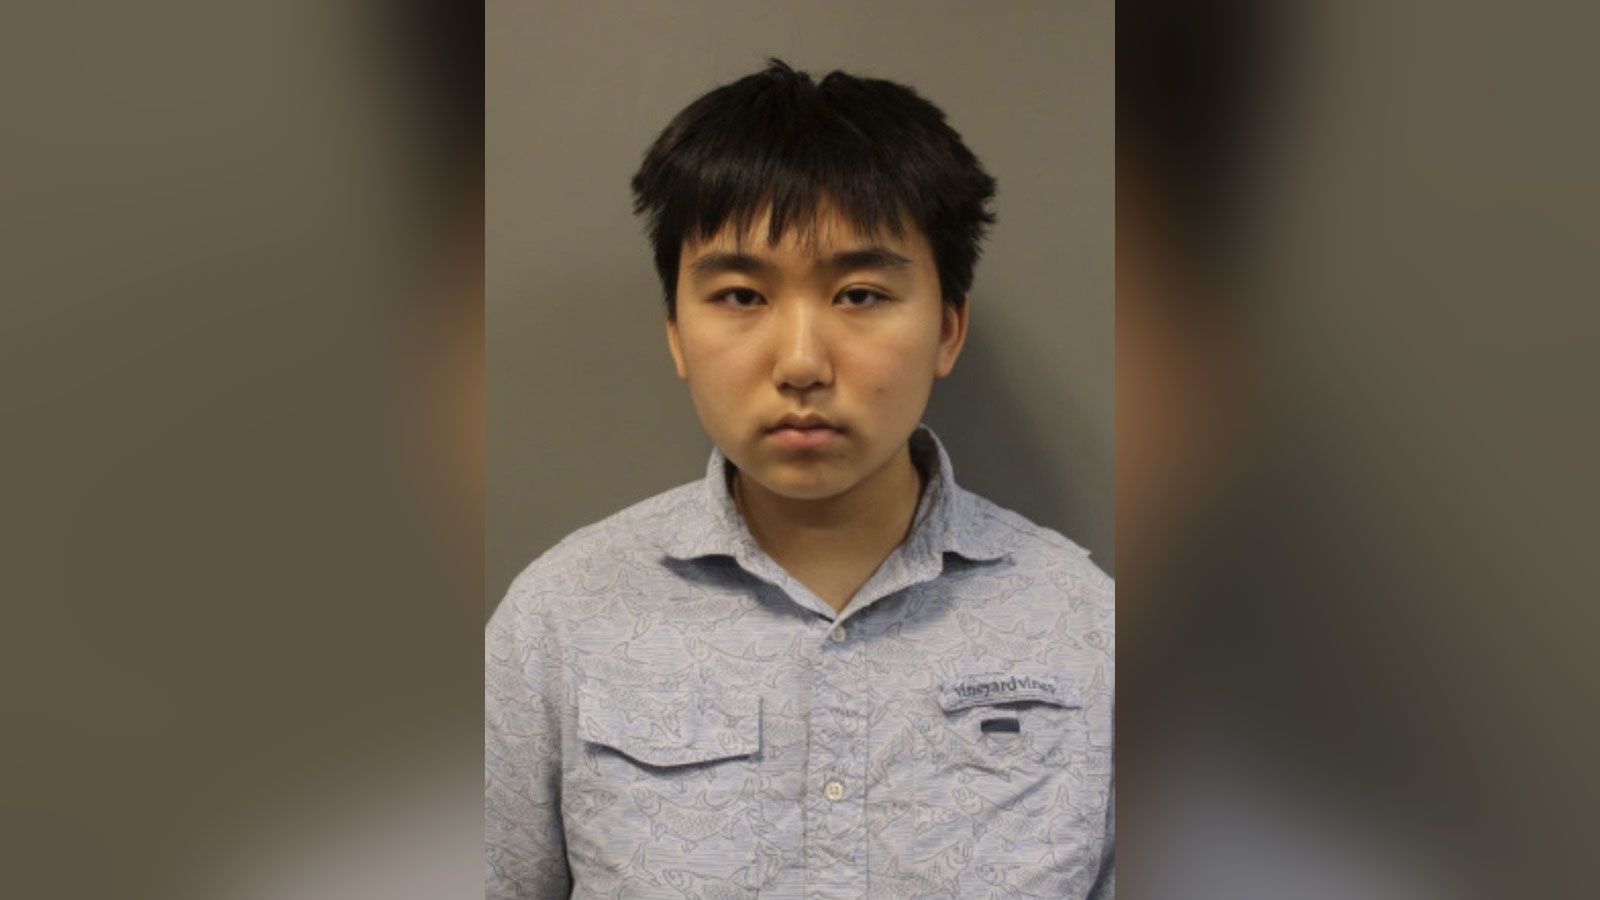 Maryland student arrested after 129-page document with school shooting plan found